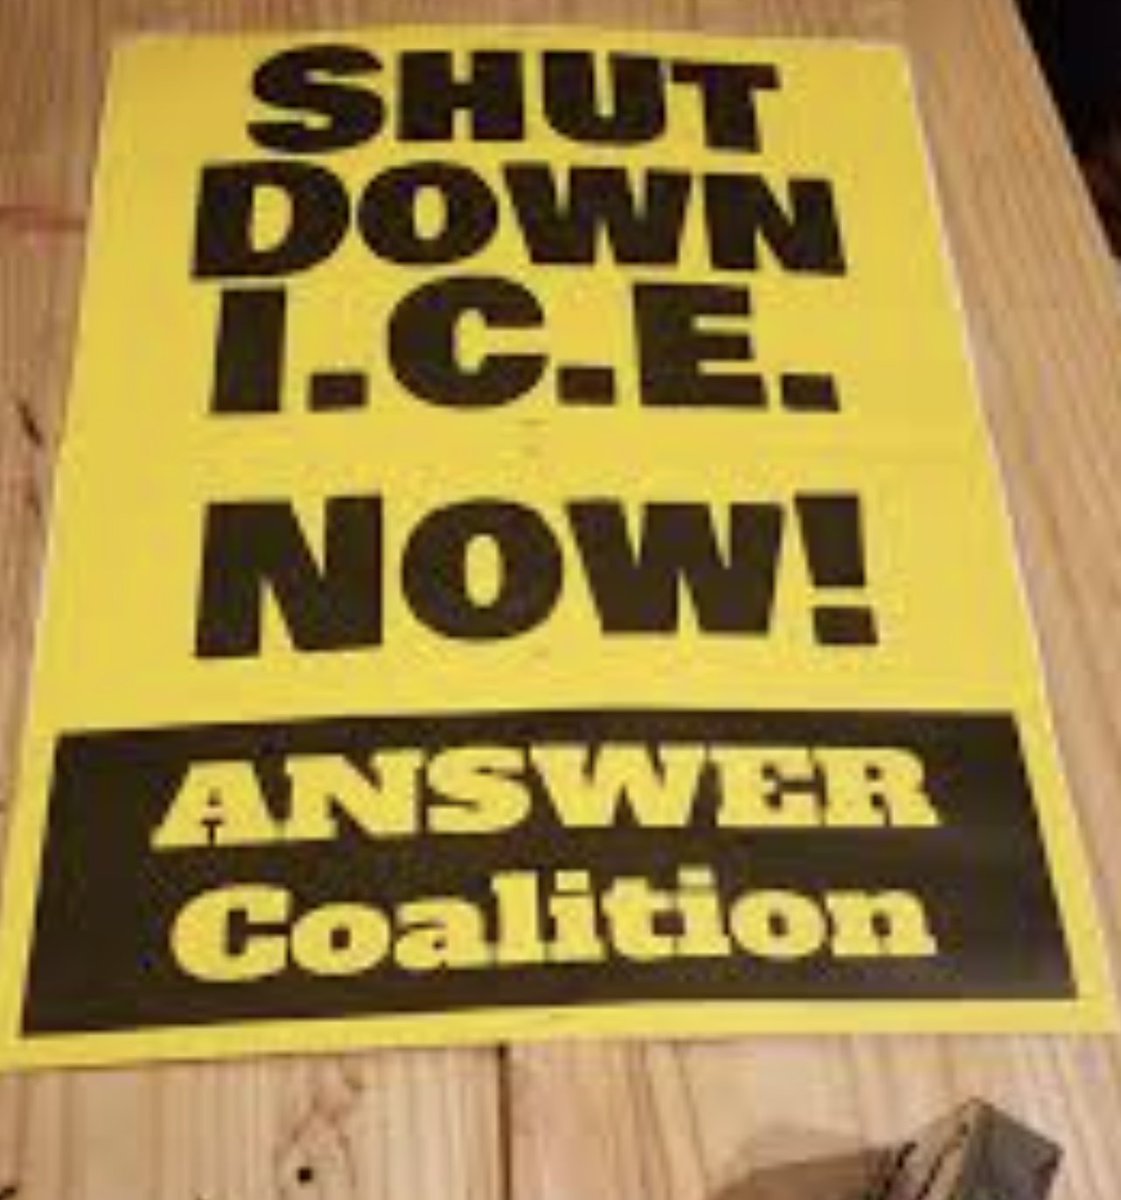 If Sunrise goons' yellow & black logo/signs look familiar (like all the way back to the mid-2000s Soros-sponsored ANSWER Coalition days to  #J20 to  #AbolishICE), then you've been paying attention! /10